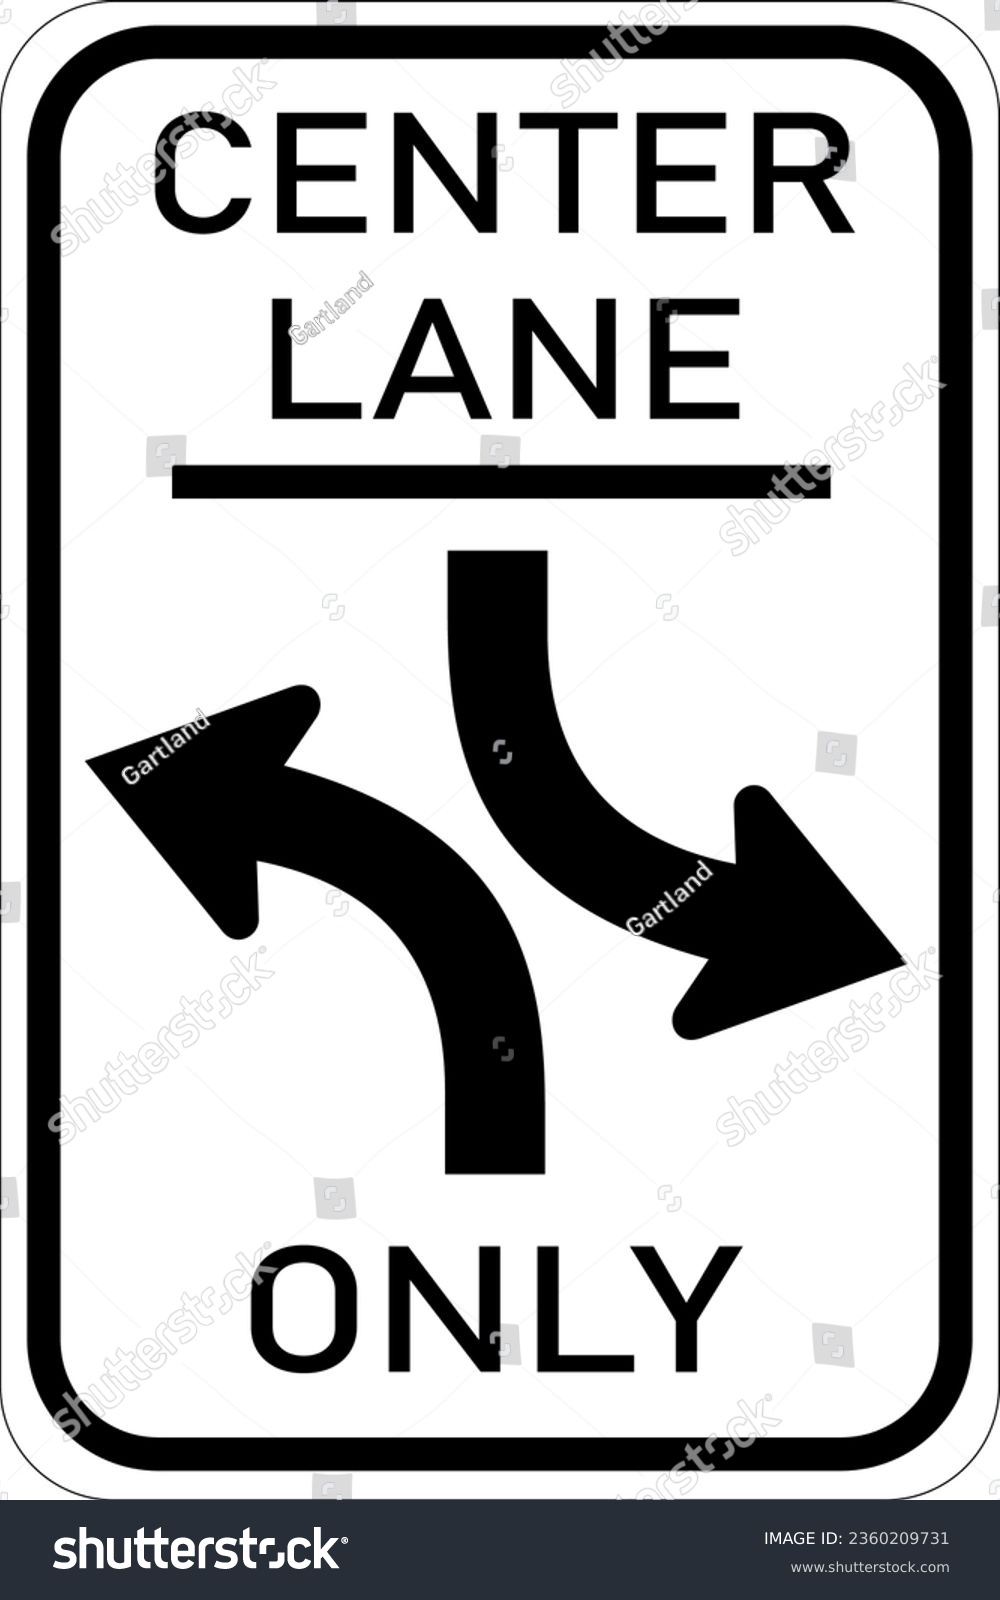 SVG of Vector graphic of a usa Two Way Left Turn, Only Center Lane highway sign. It consists of two curved arrows indicating traffic flow, plus the wording, Center Lane contained in a white rectangle svg